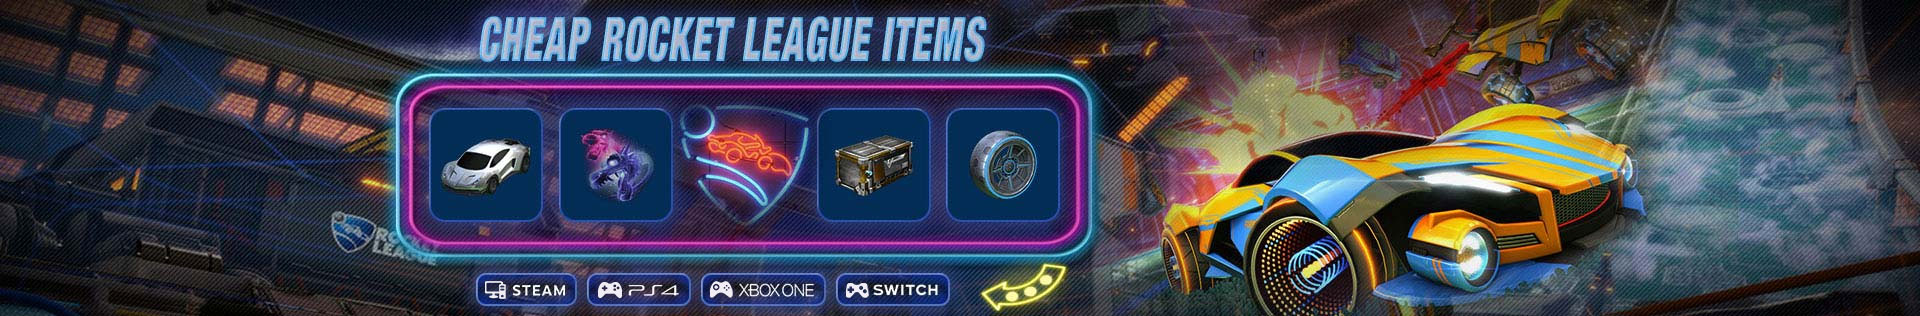 how does buying rocket league items work